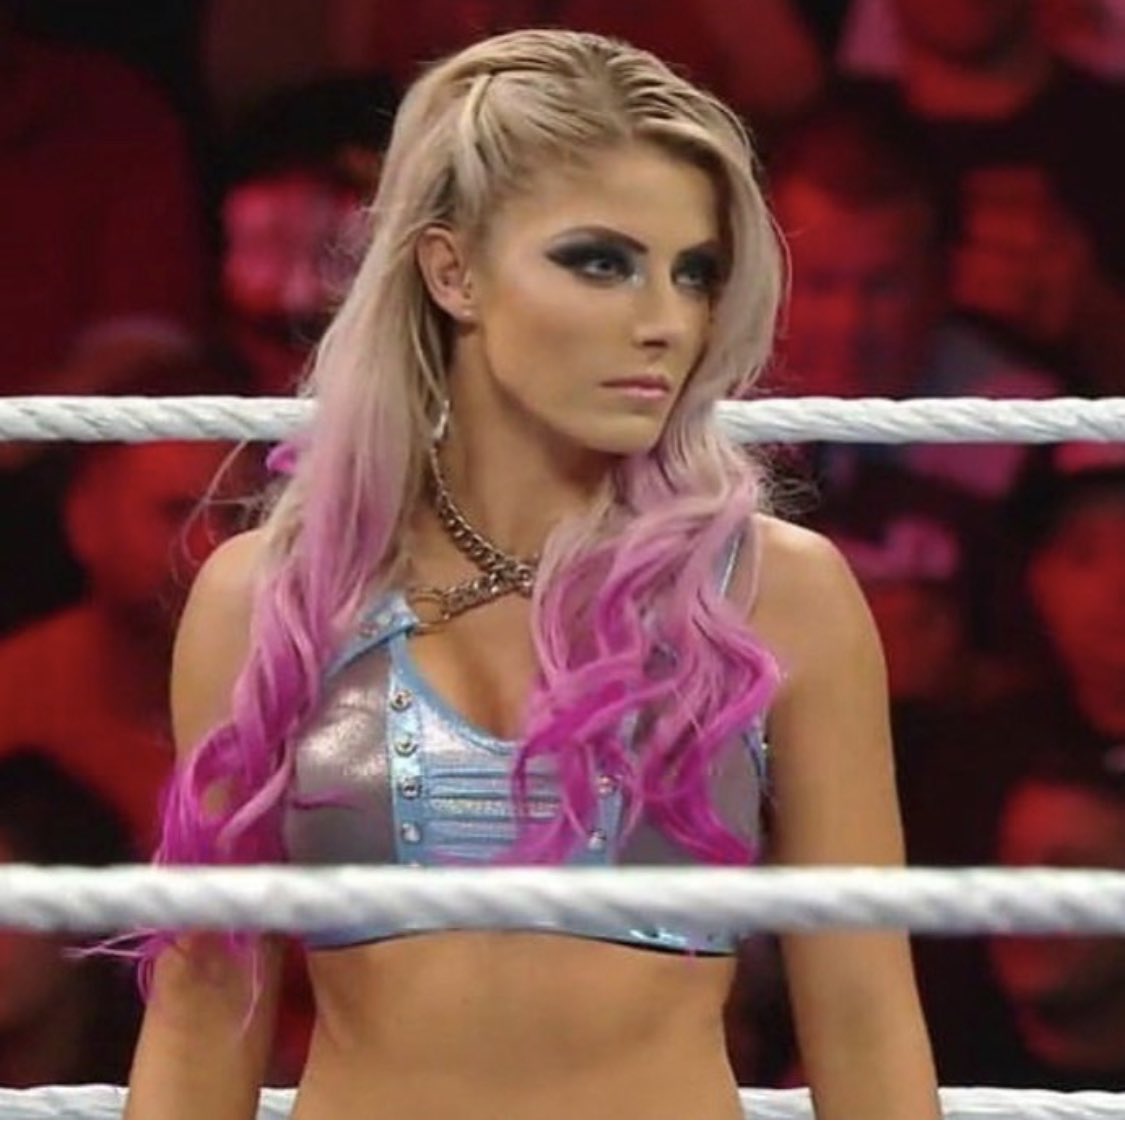 Alexa Bliss is so beautiful last night at #ExtremeRules.